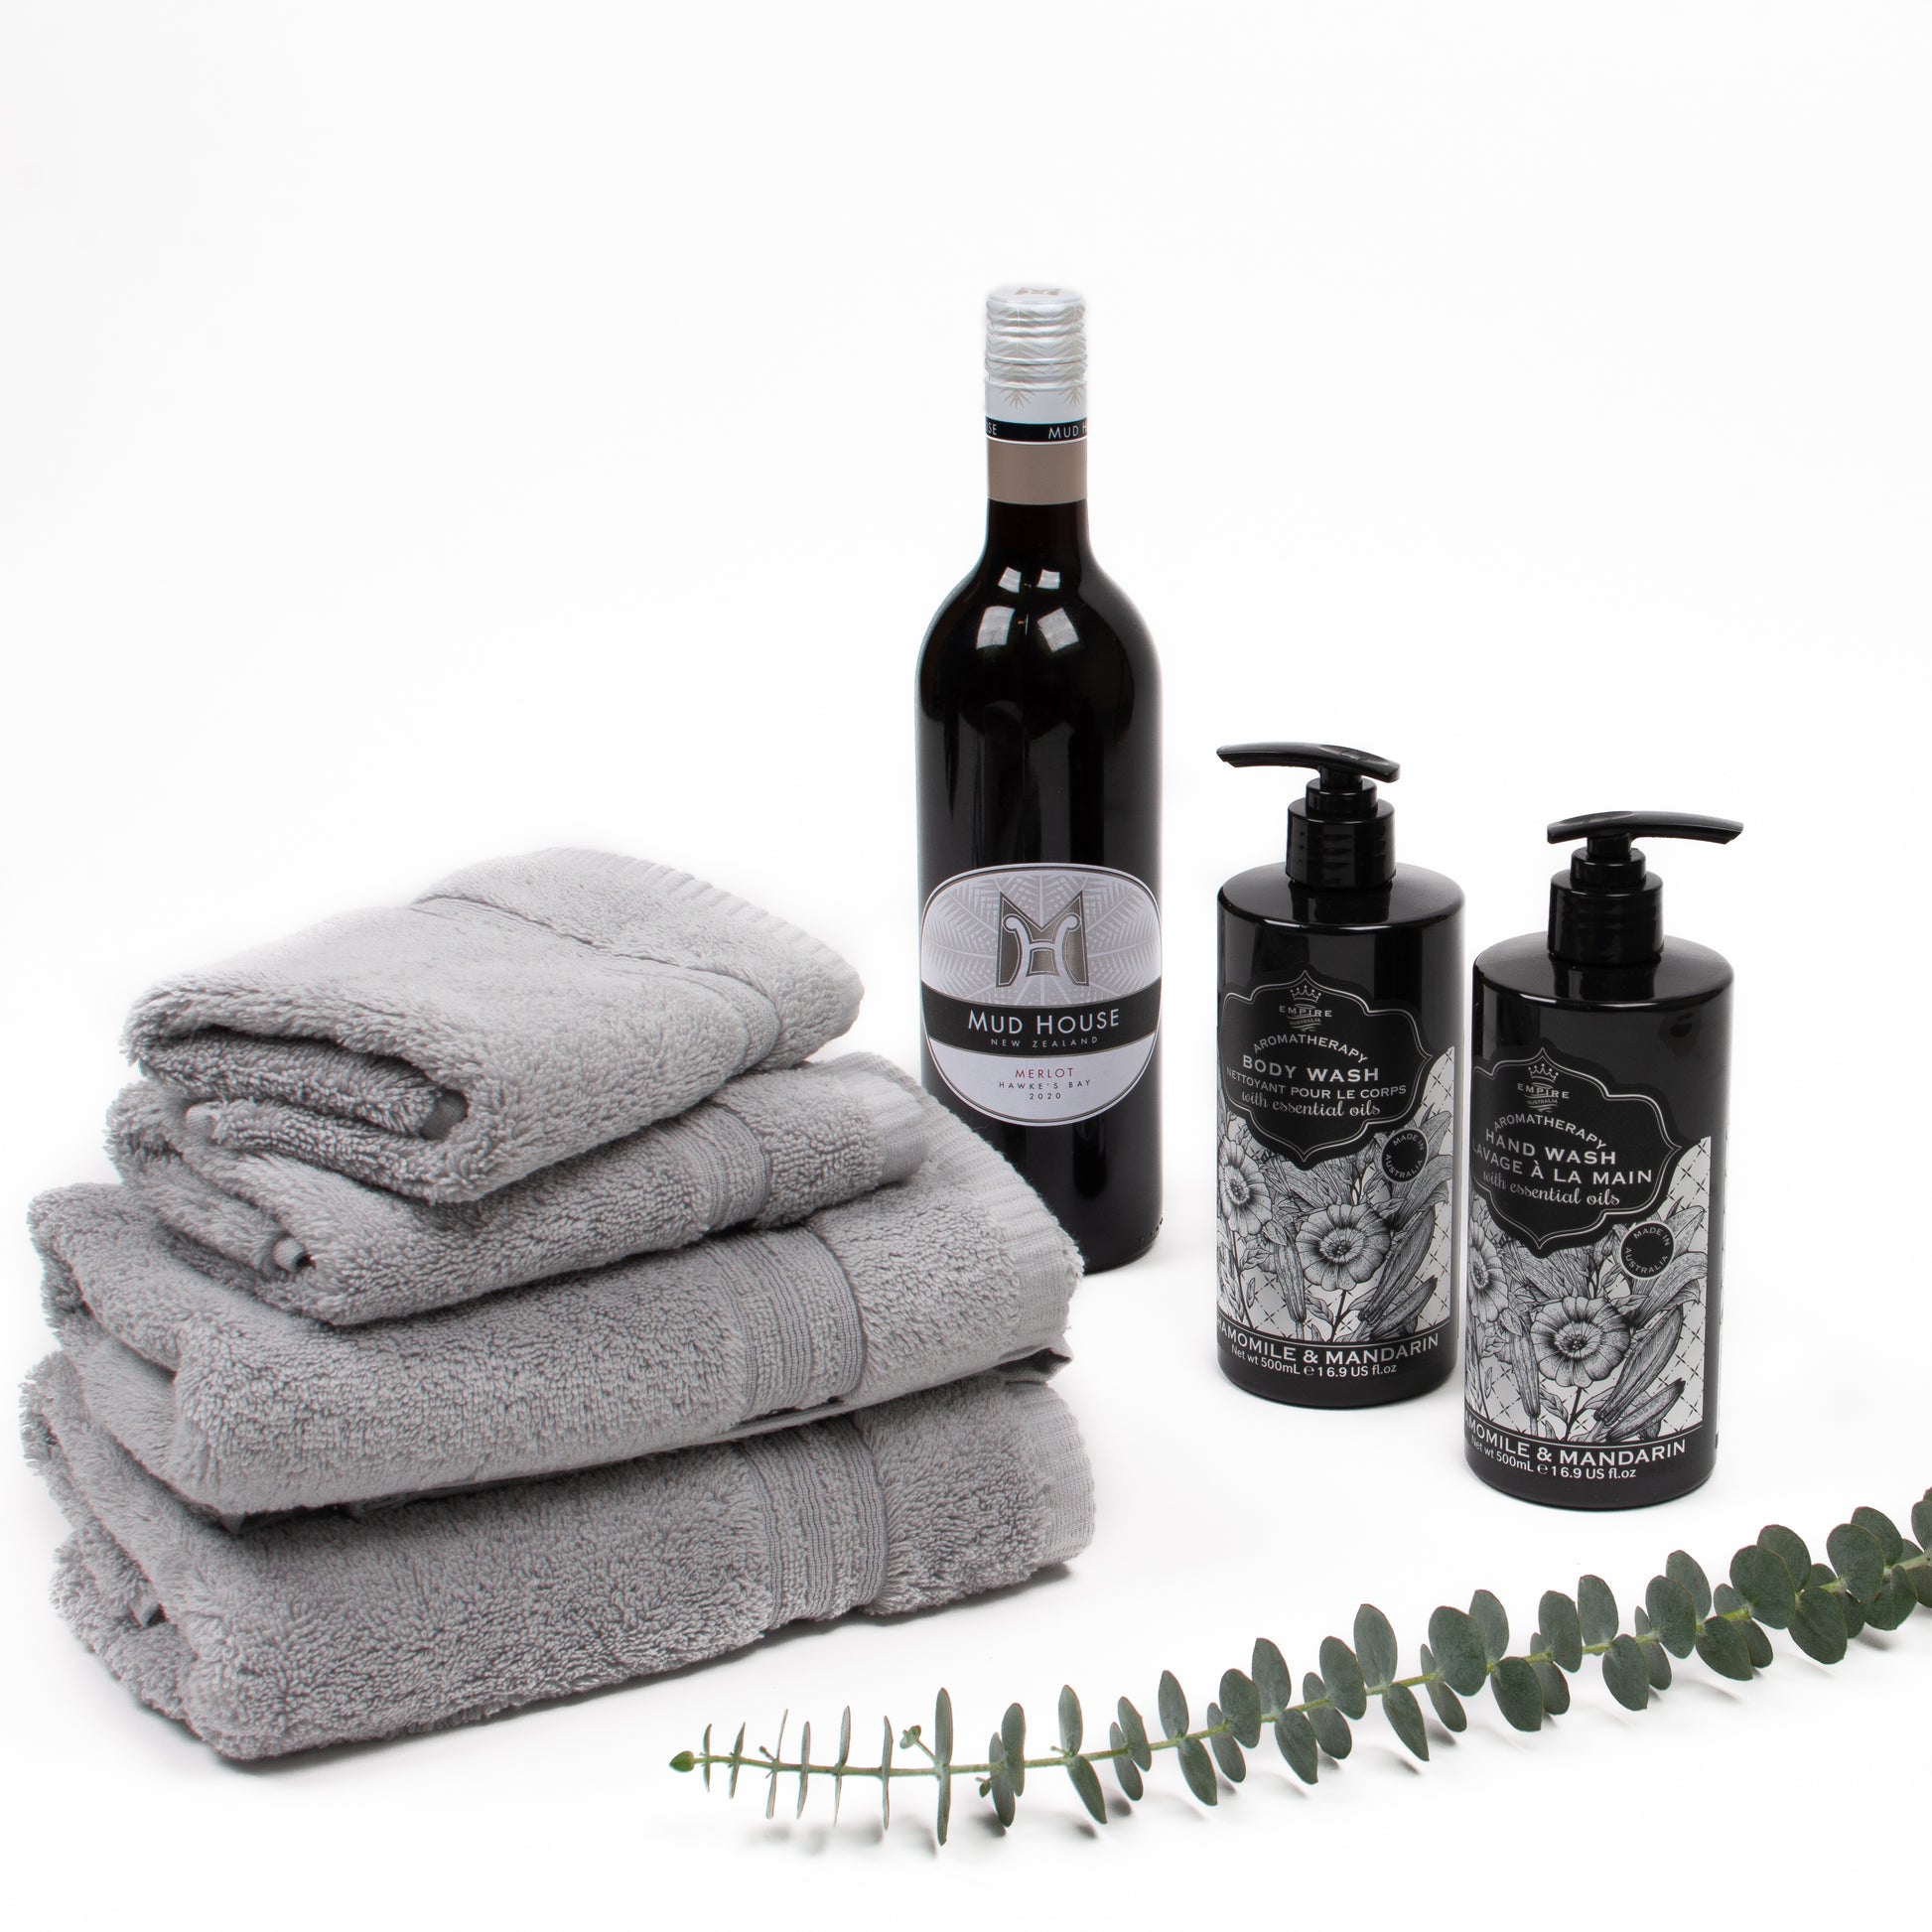 Products featured out of gift box are red wine, two hand towels and matching face cloths, hand wash, body wash.